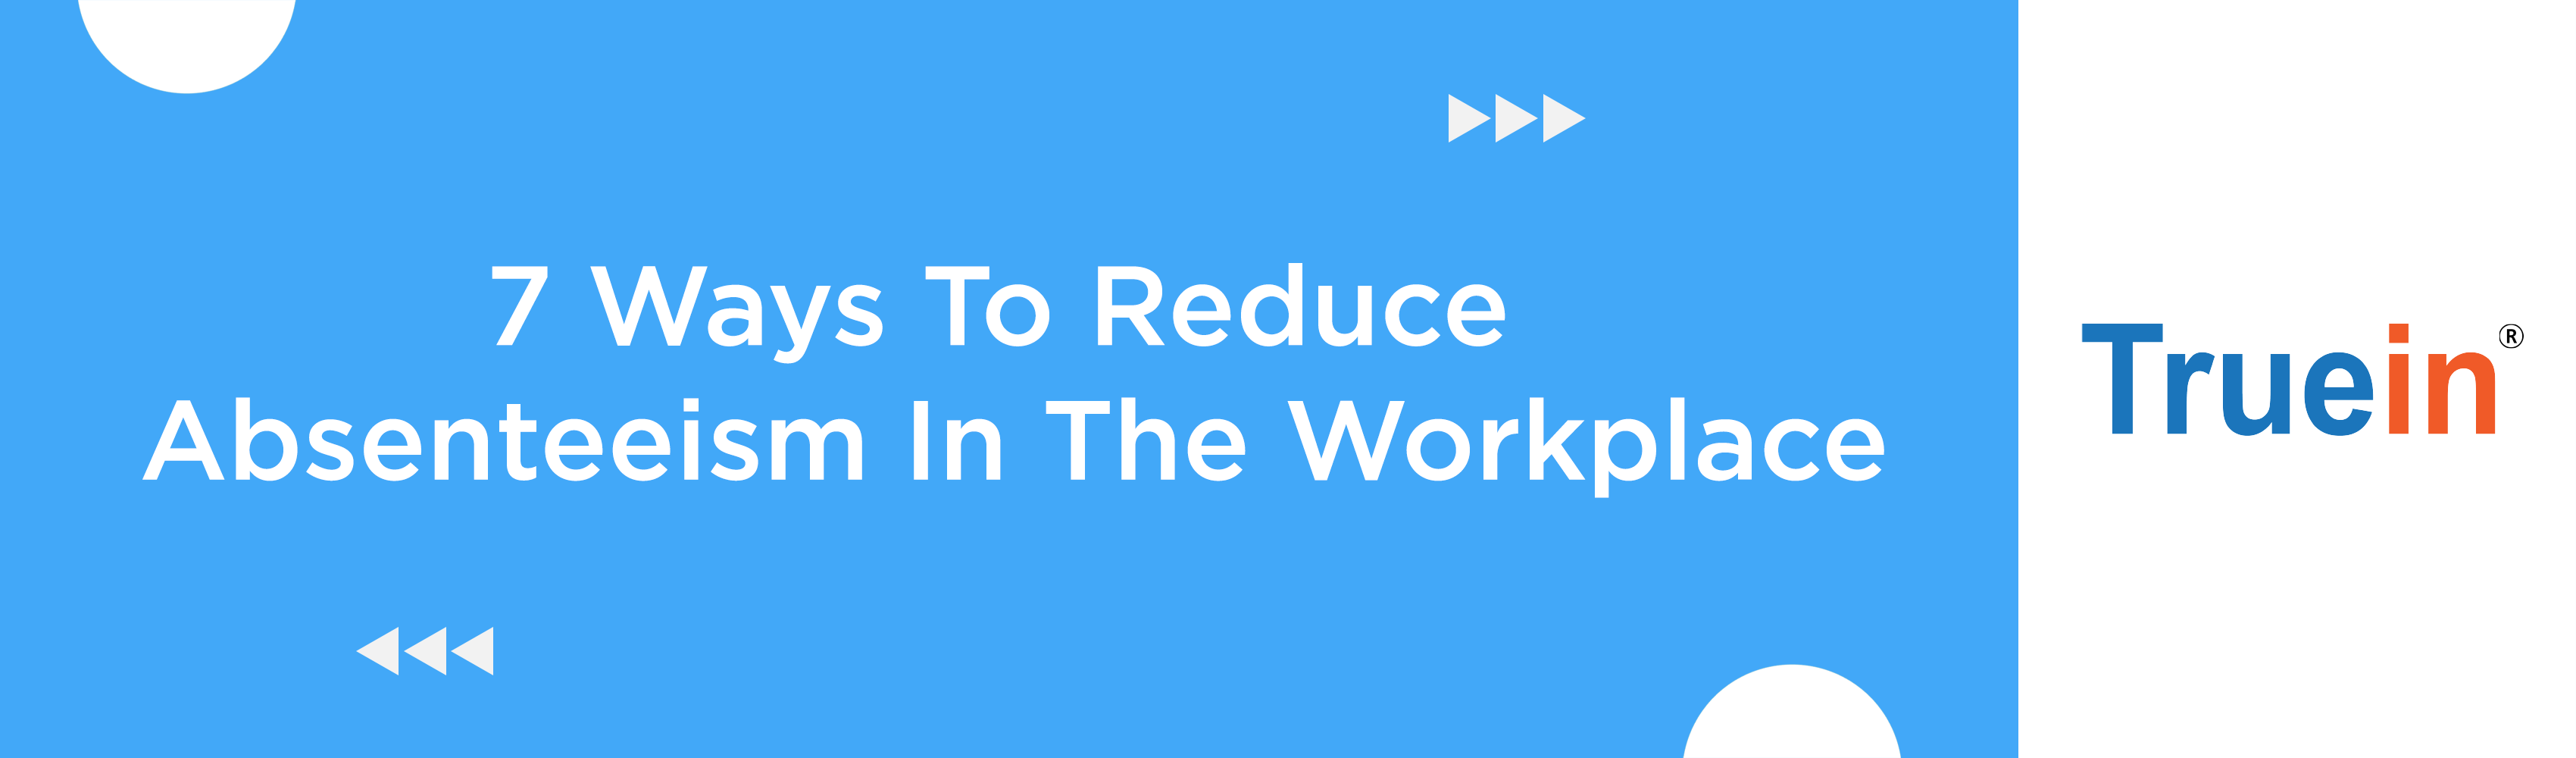 7 Ways To Reduce Absenteeism In The Workplace